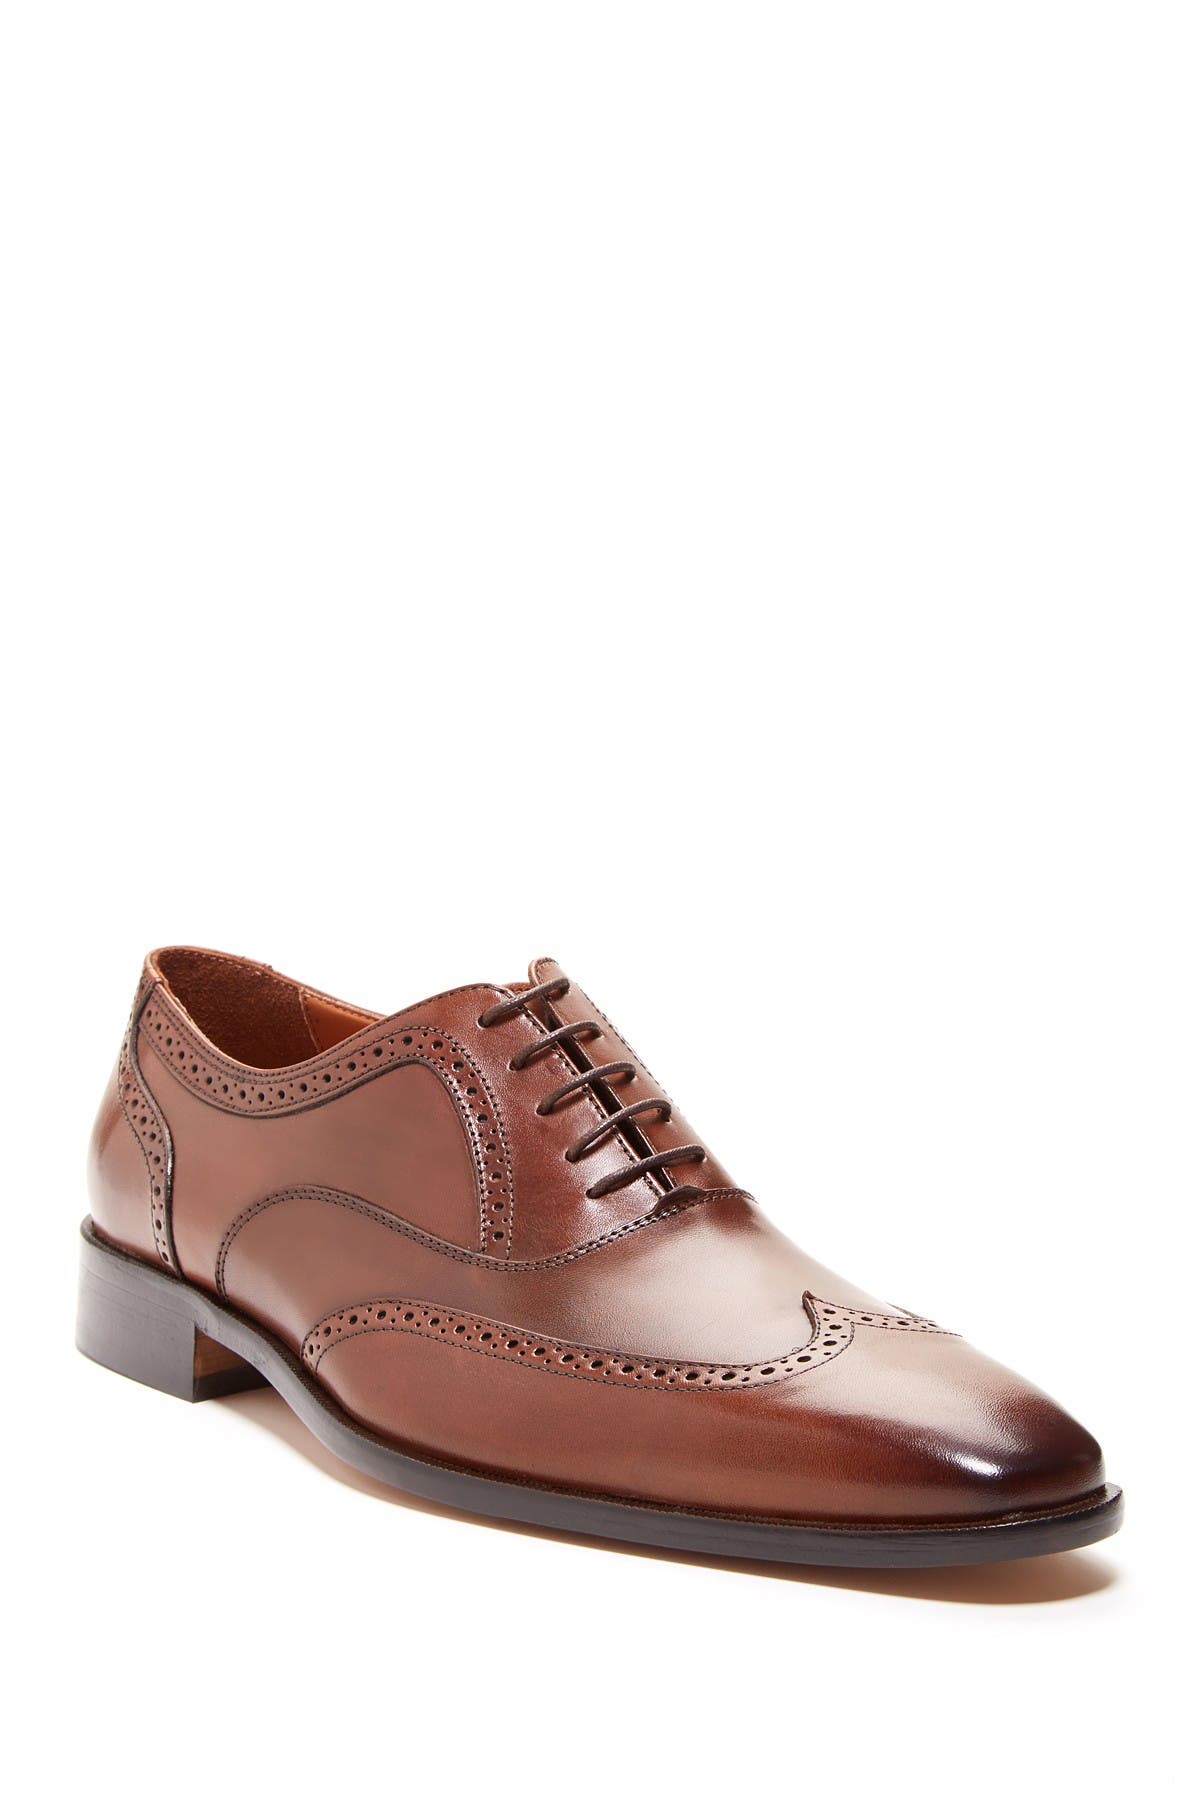 broletto mens shoes